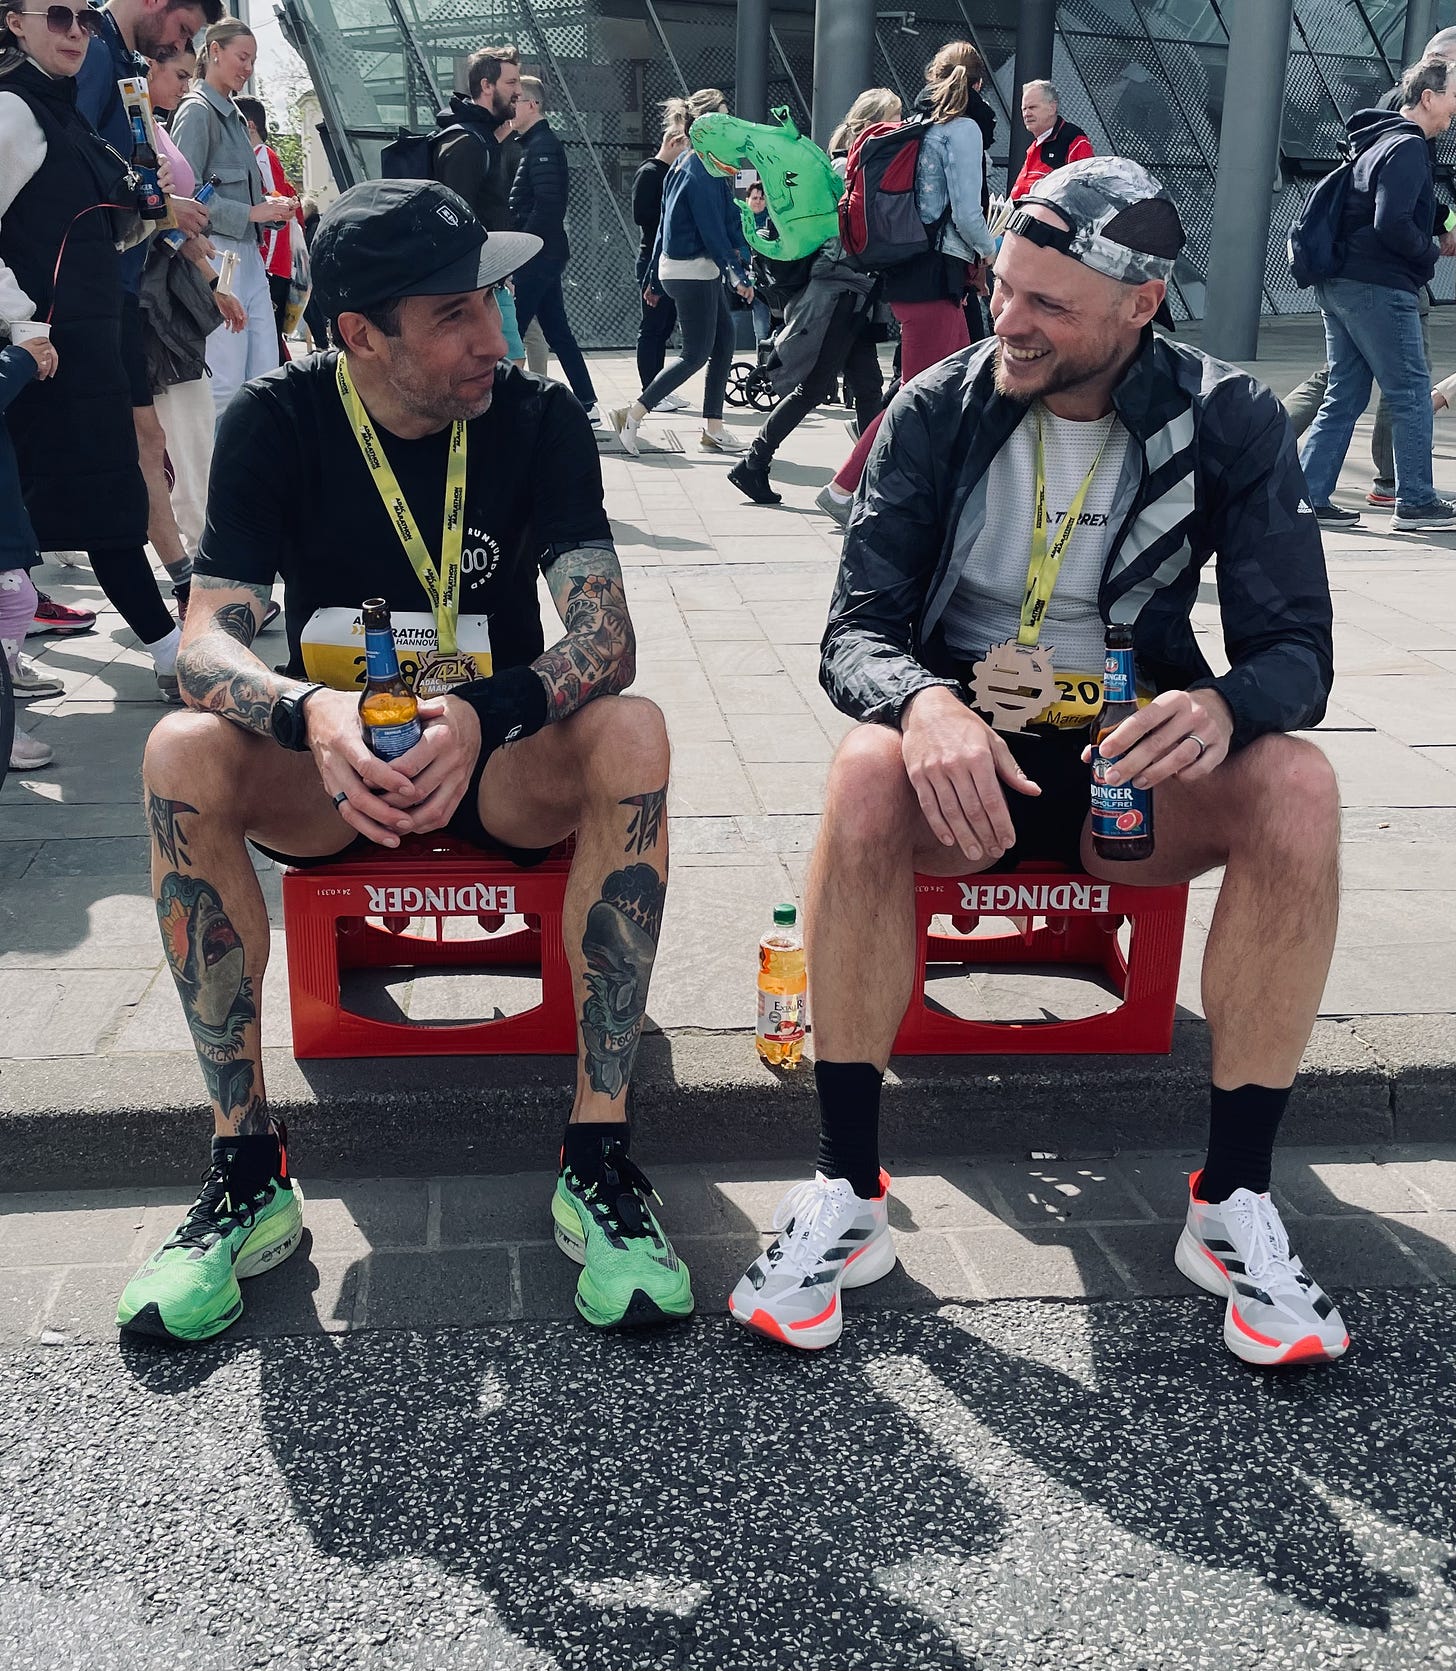 The author sitting on a beer crate after the race talking to his friend Marian Wilken